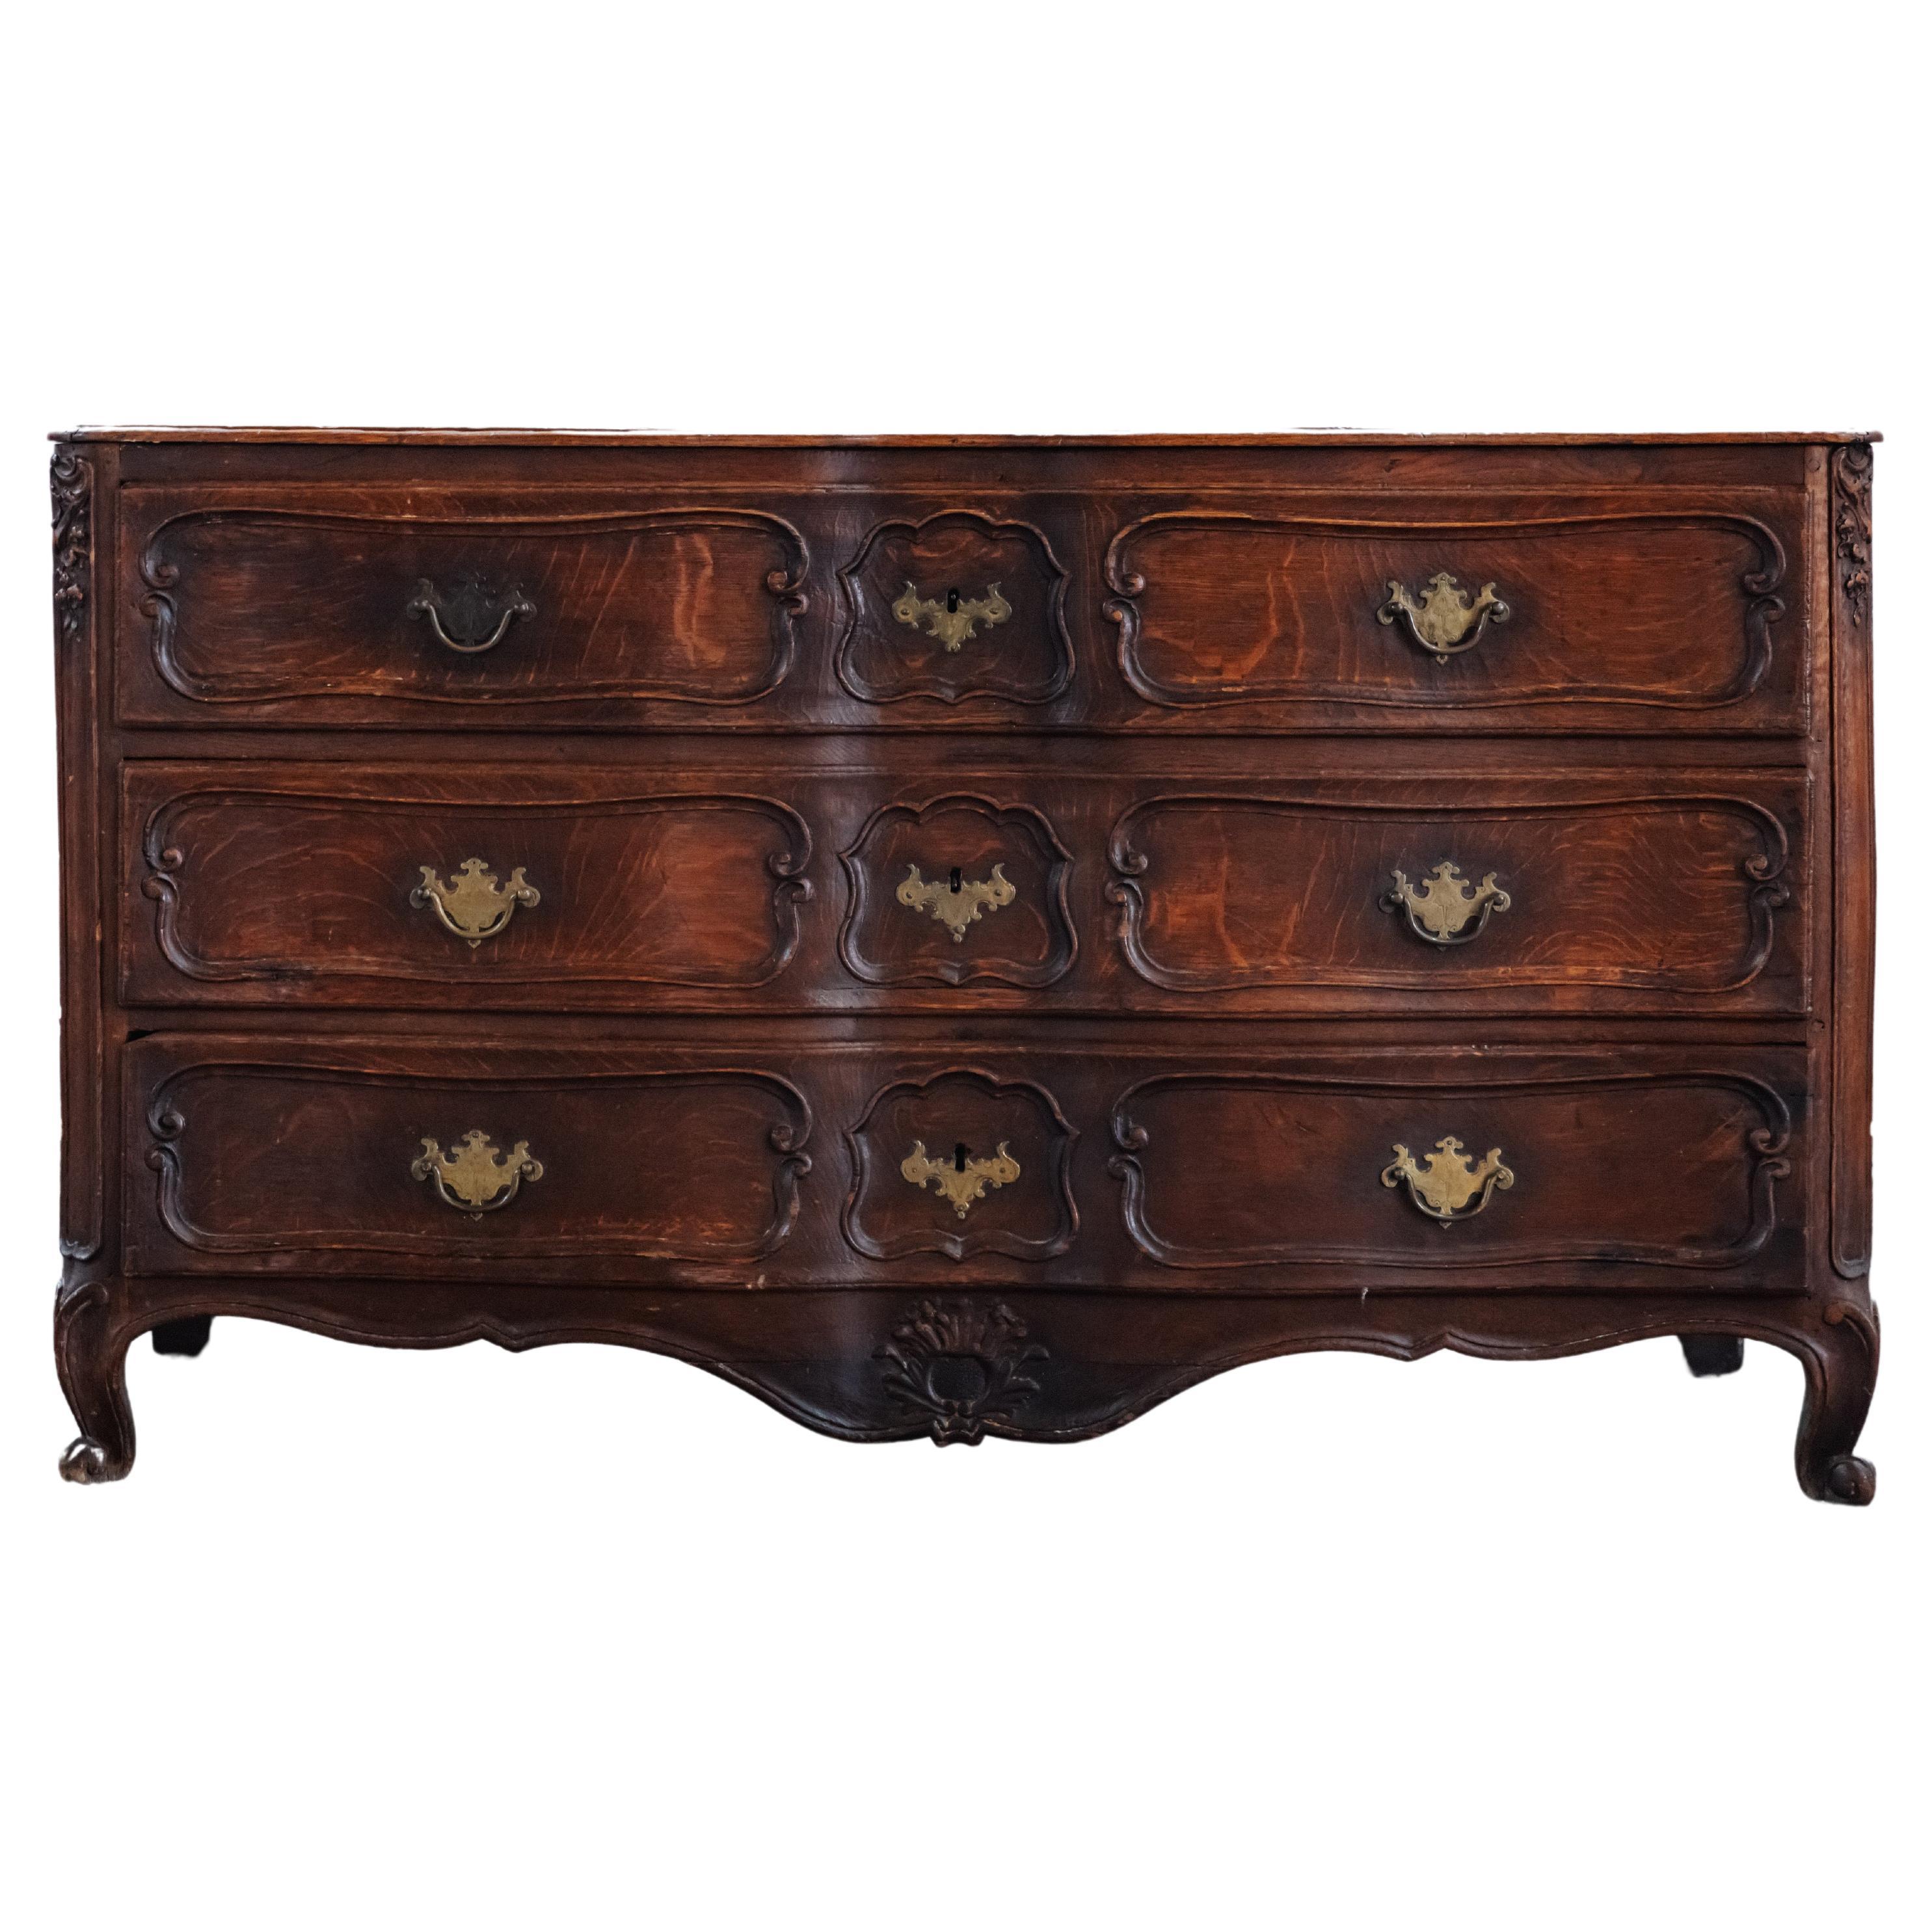 Early Oak Chest Of Drawers Form France, Circa 1800